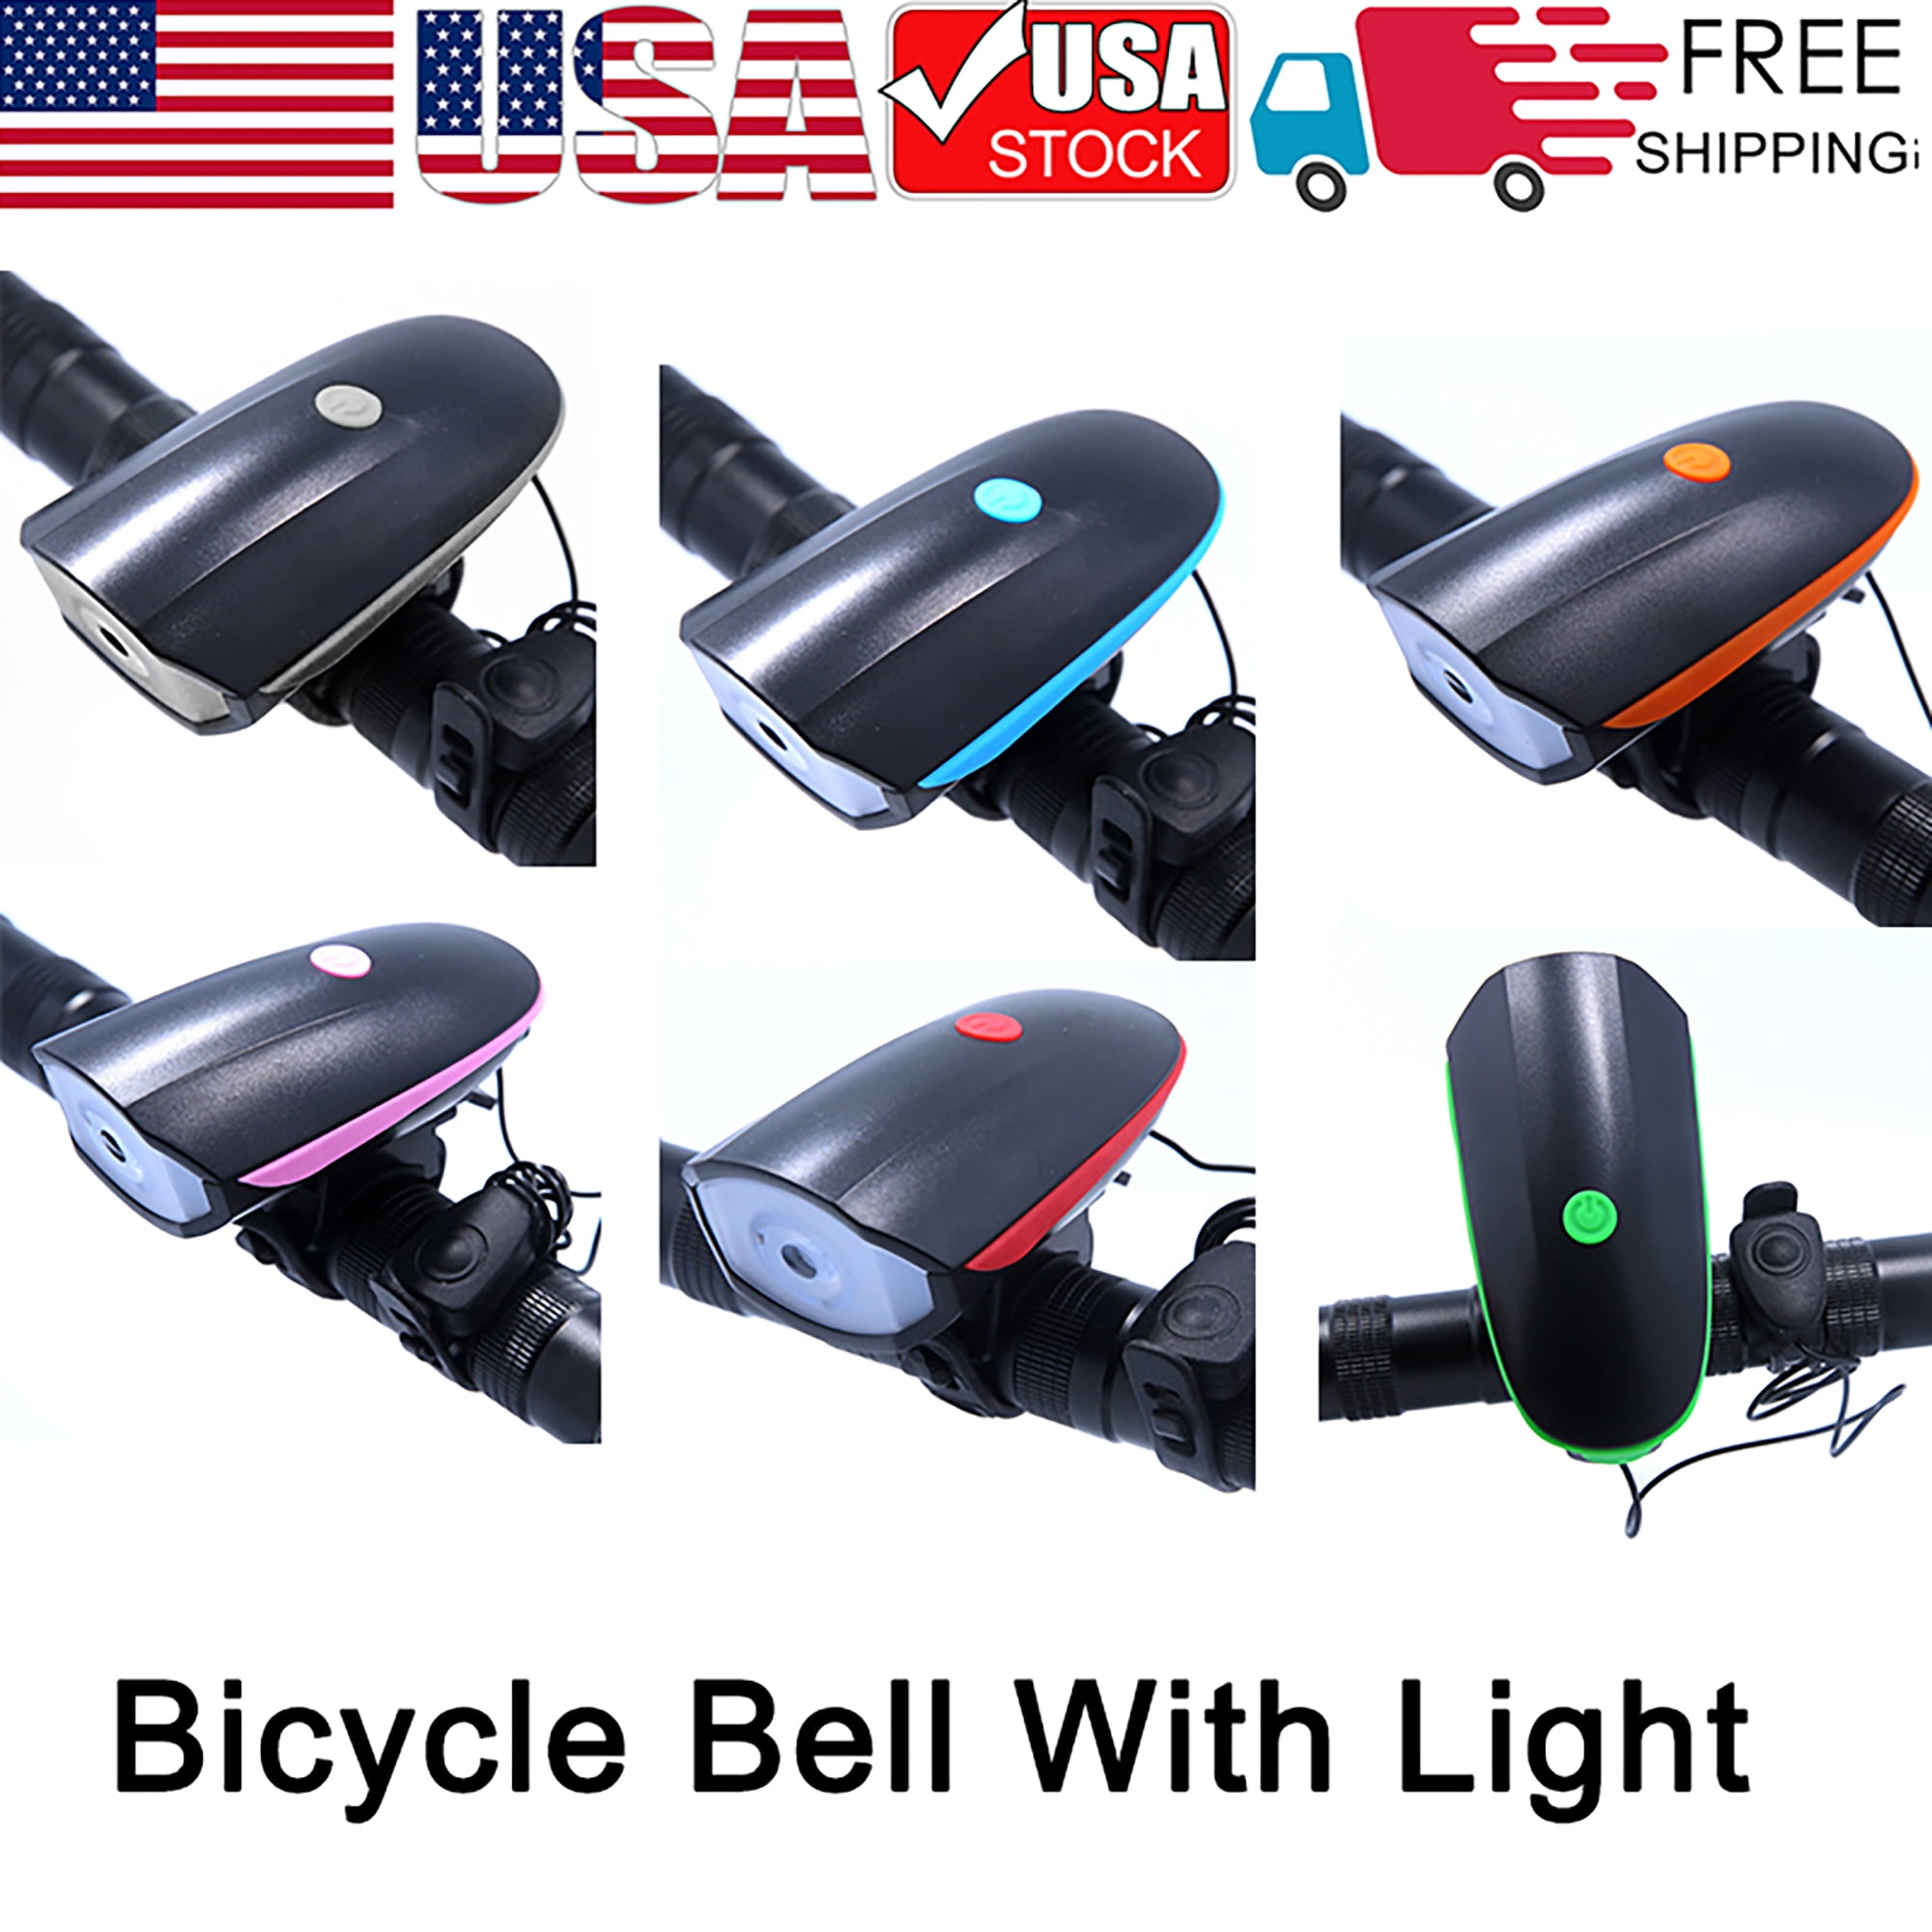 AAA Batteries Needed Flash Rear Light High Visibility Warning Blinky Light for Reflective Gear Bicycle Taillight BV Bike 3 LED Safety Lights 3 Mode Clip on Running Cycling Walking Dog Tail Light 